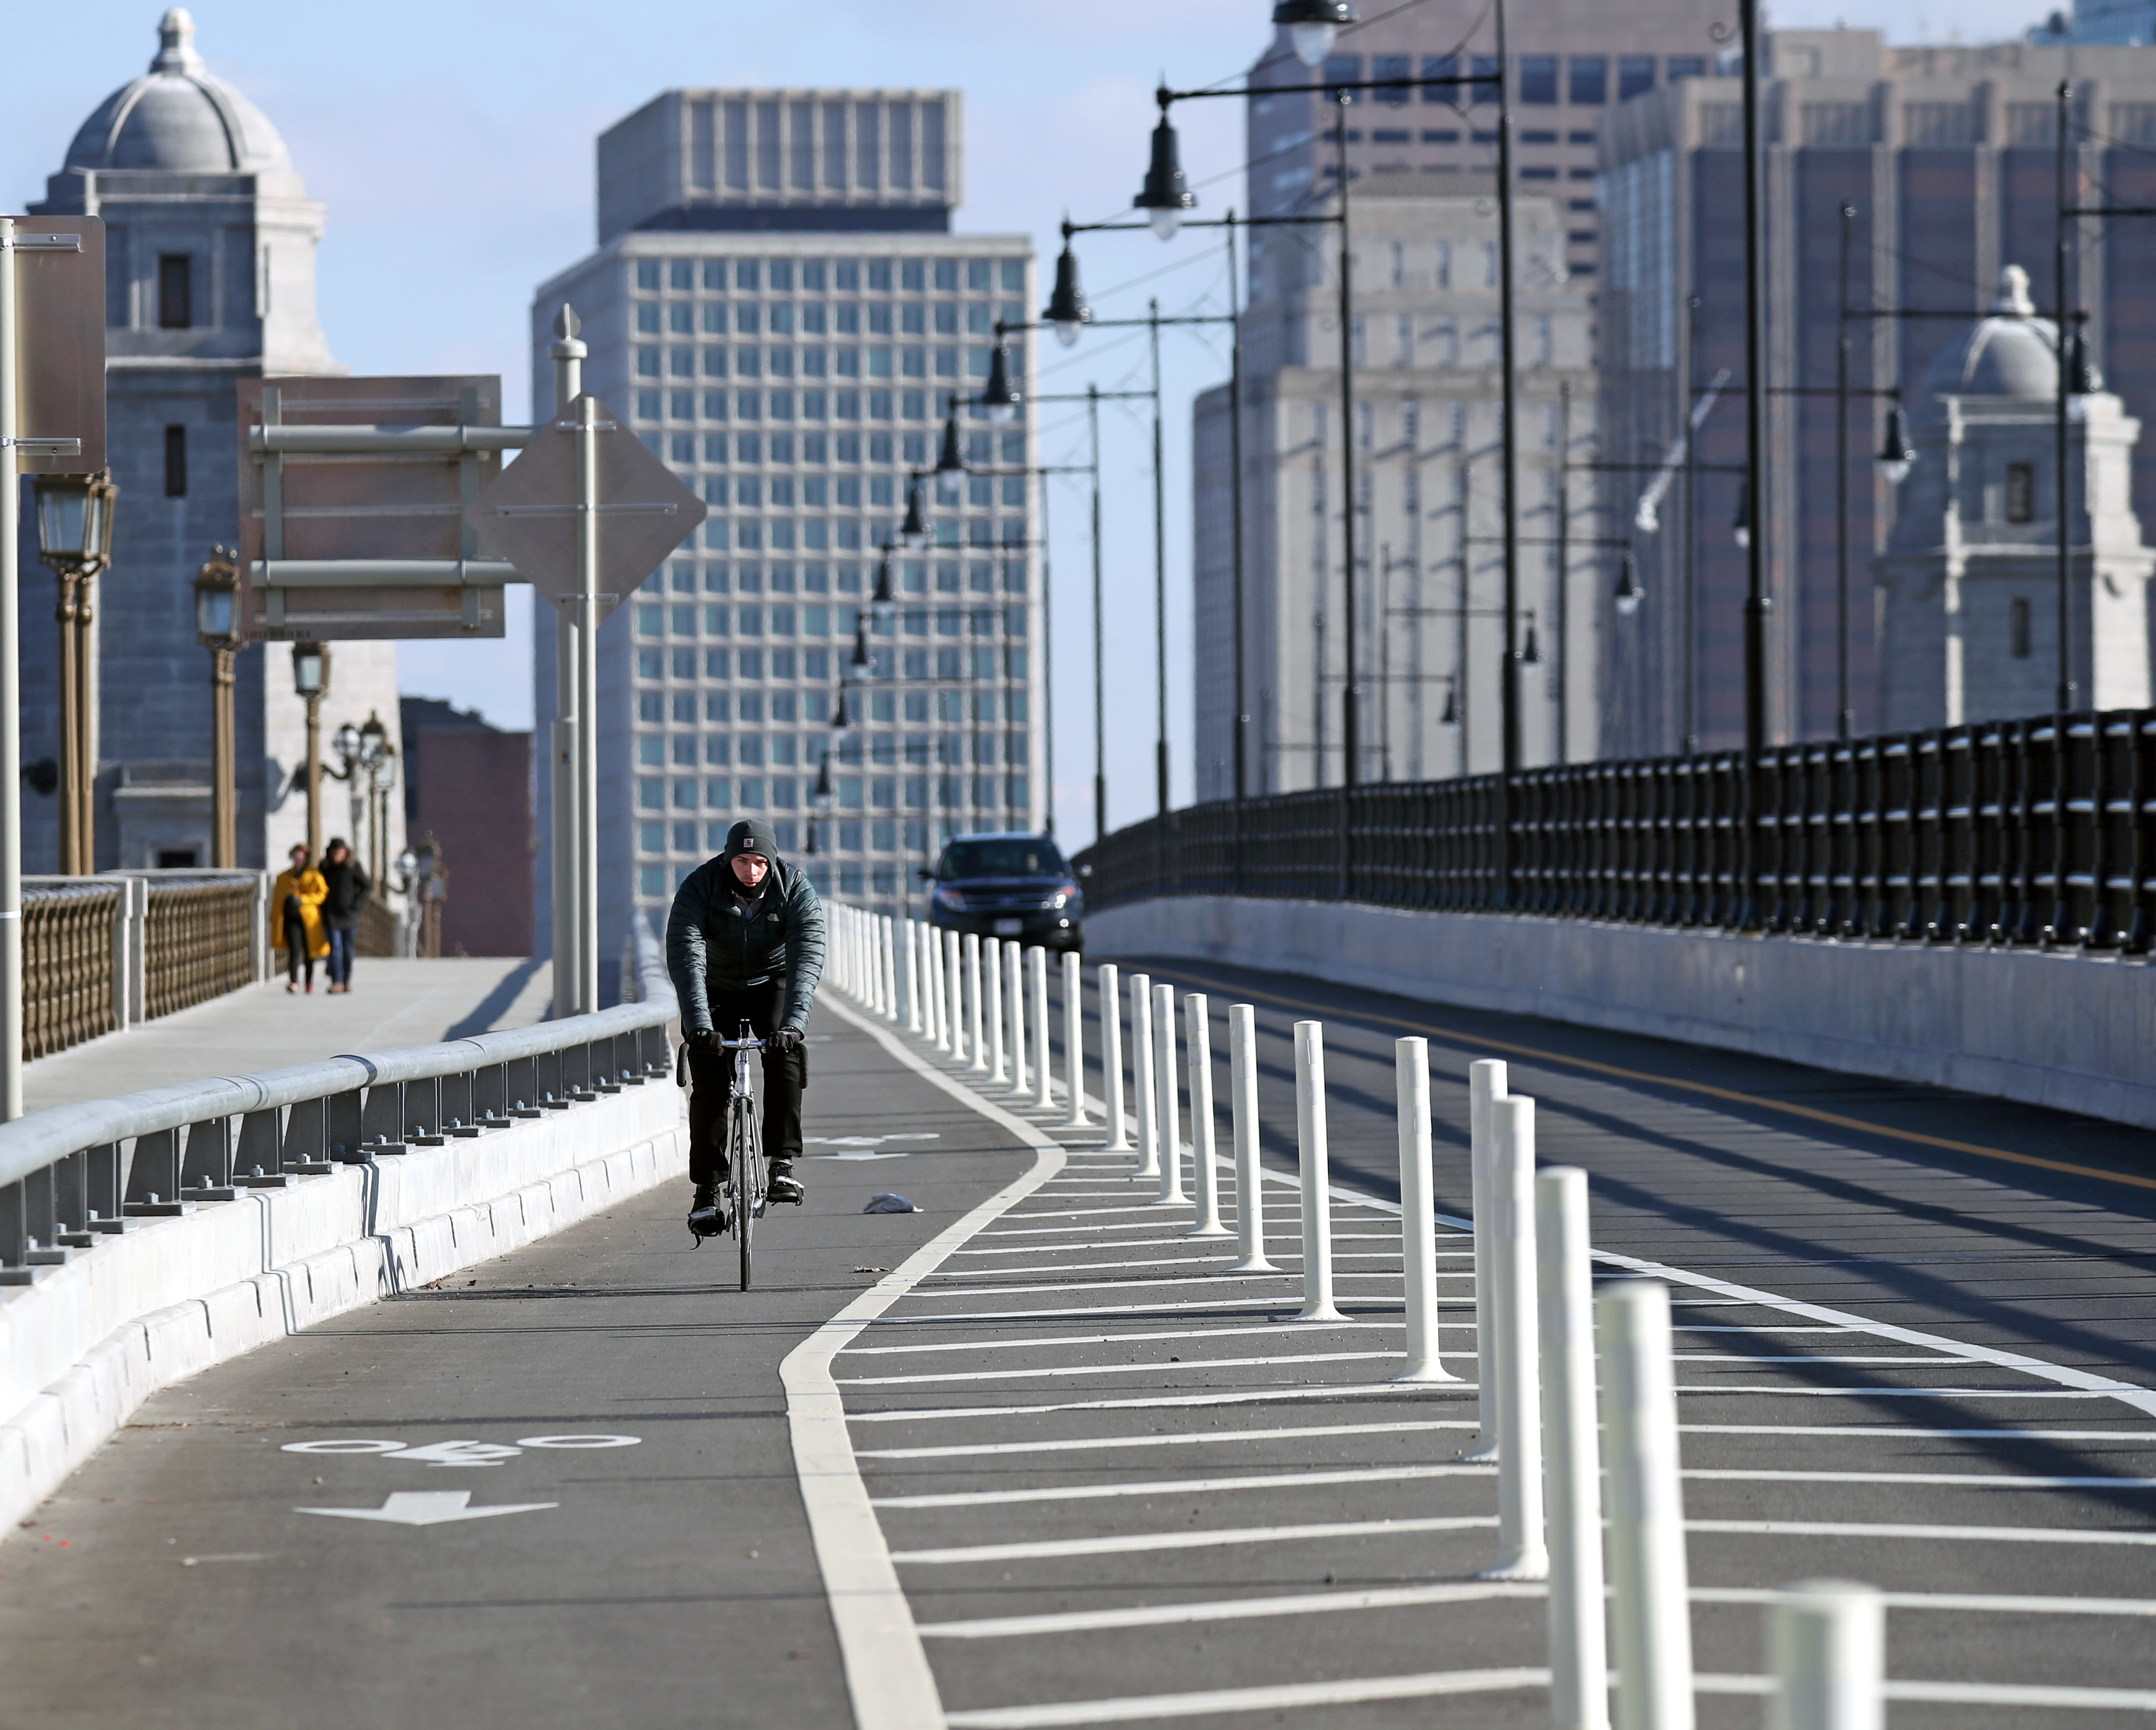 A lone bicyclist riding in a protected bike lane on a bridge and there are buildings in the background.